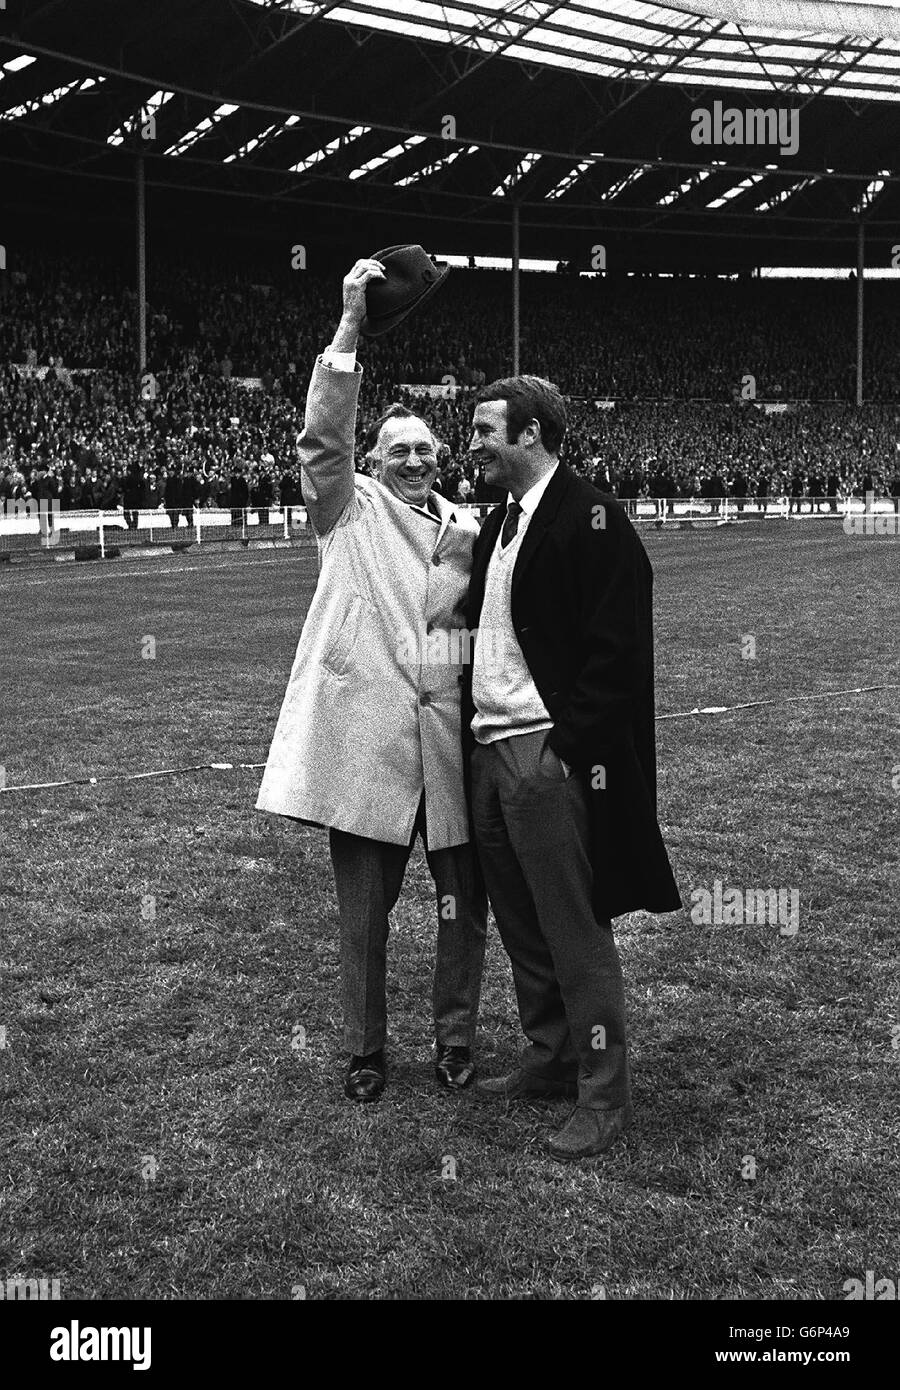 Joe Mercer (left), the manager of Manchester City football club raising his hat with Malcolm Allison, the teams coach, on the pitch at Wembley after their team beat Leicester City to win the FA Cup final 1-0. Stock Photo